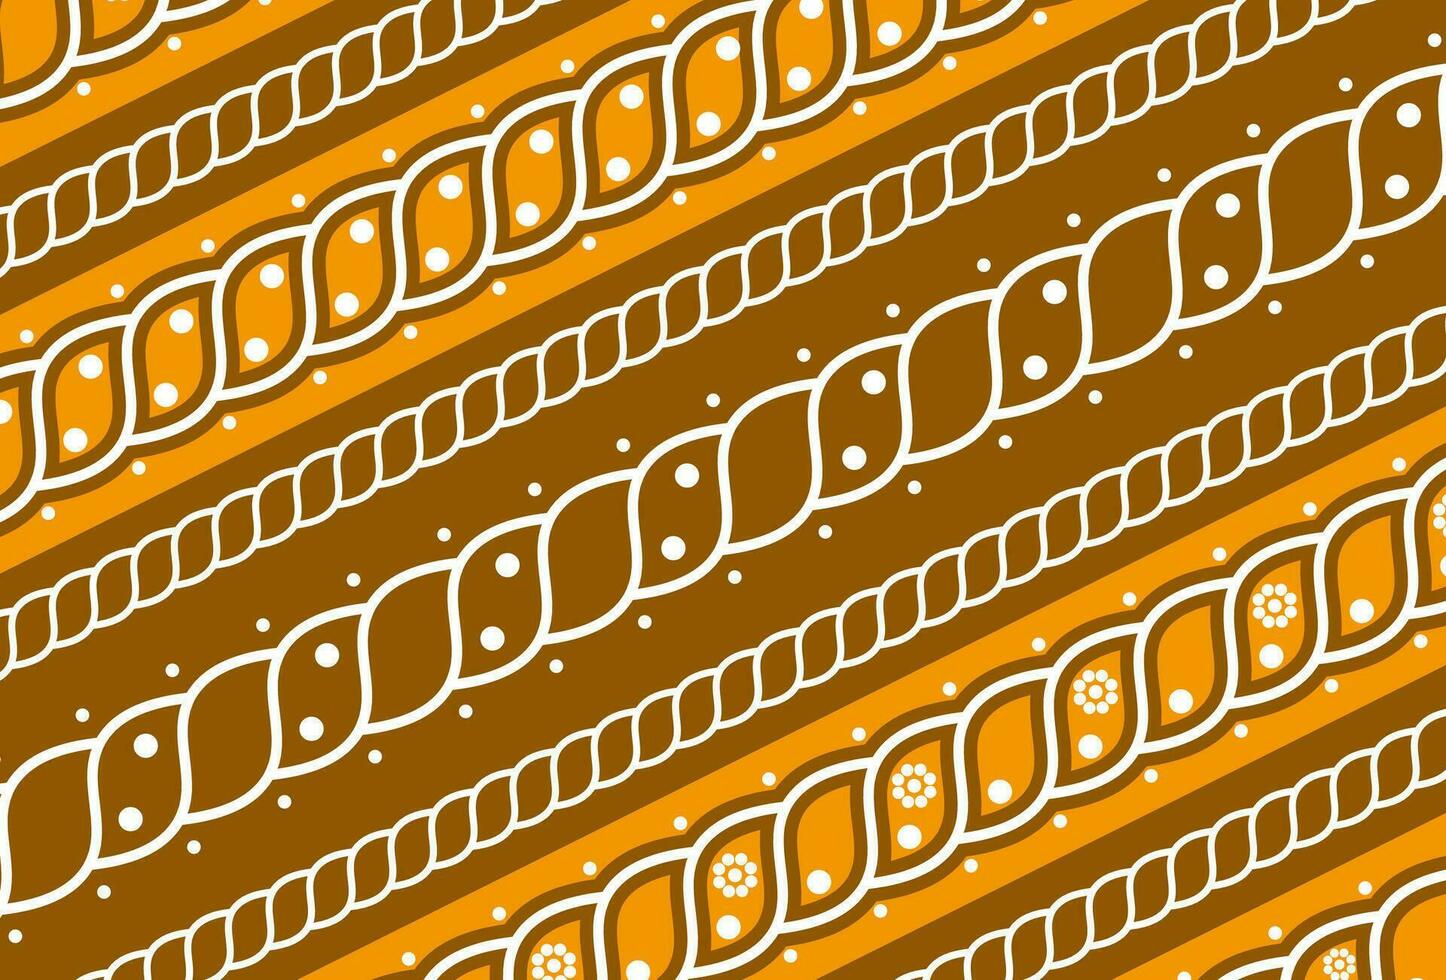 Pattern of patterned batik, brown, white, suitable for background, decoration, pattern, screen printing, motifs, shirts, clothes, printing, paper, cardboard, bags, etc. vector